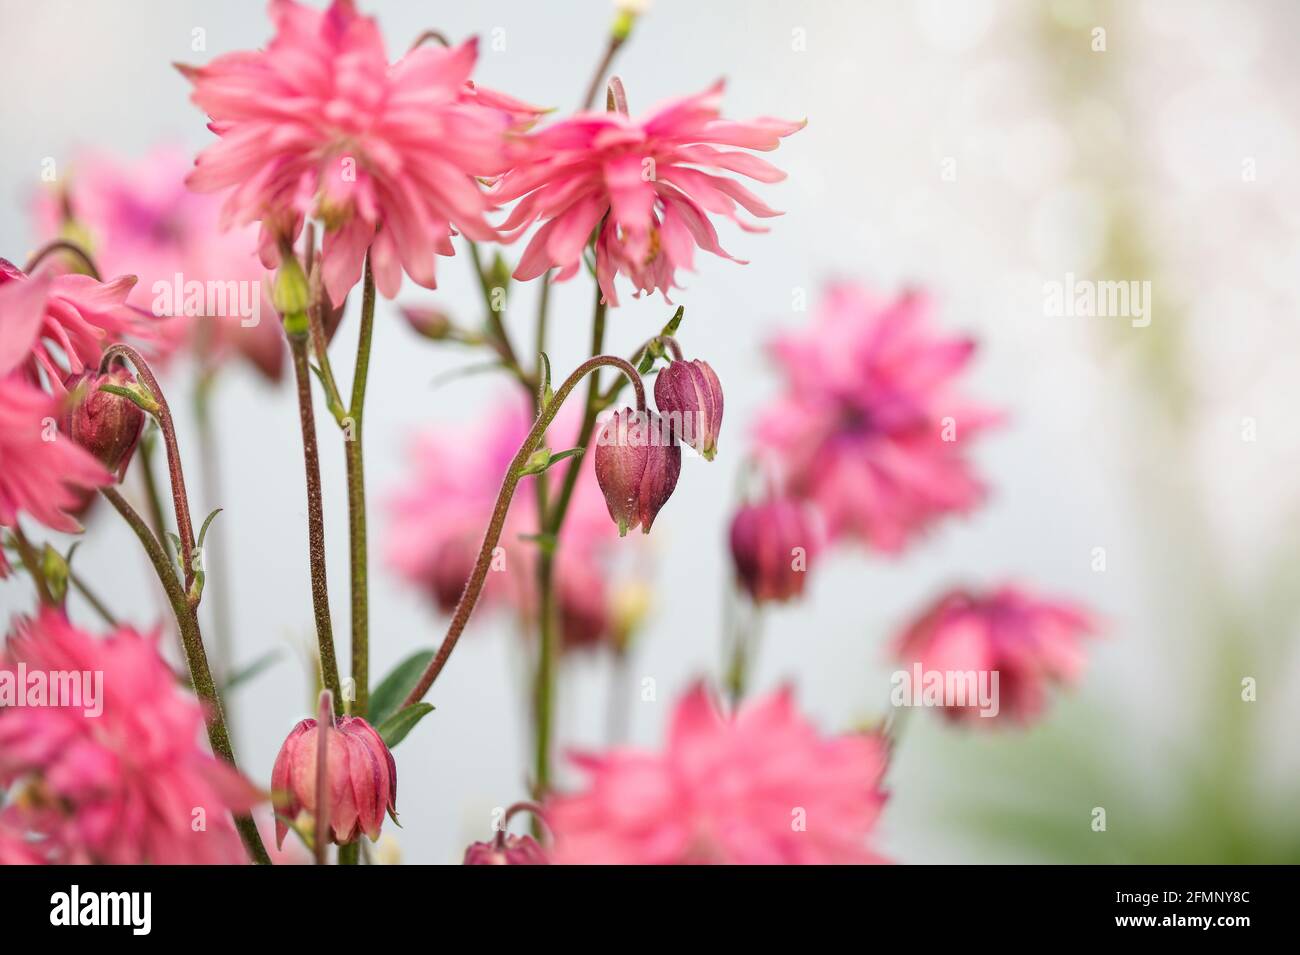 Beautiful Aquilegia vulgaris 'Clementine Salmon-Rose' blossoms in the flower garden. Selective focus with blurred background. Stock Photo